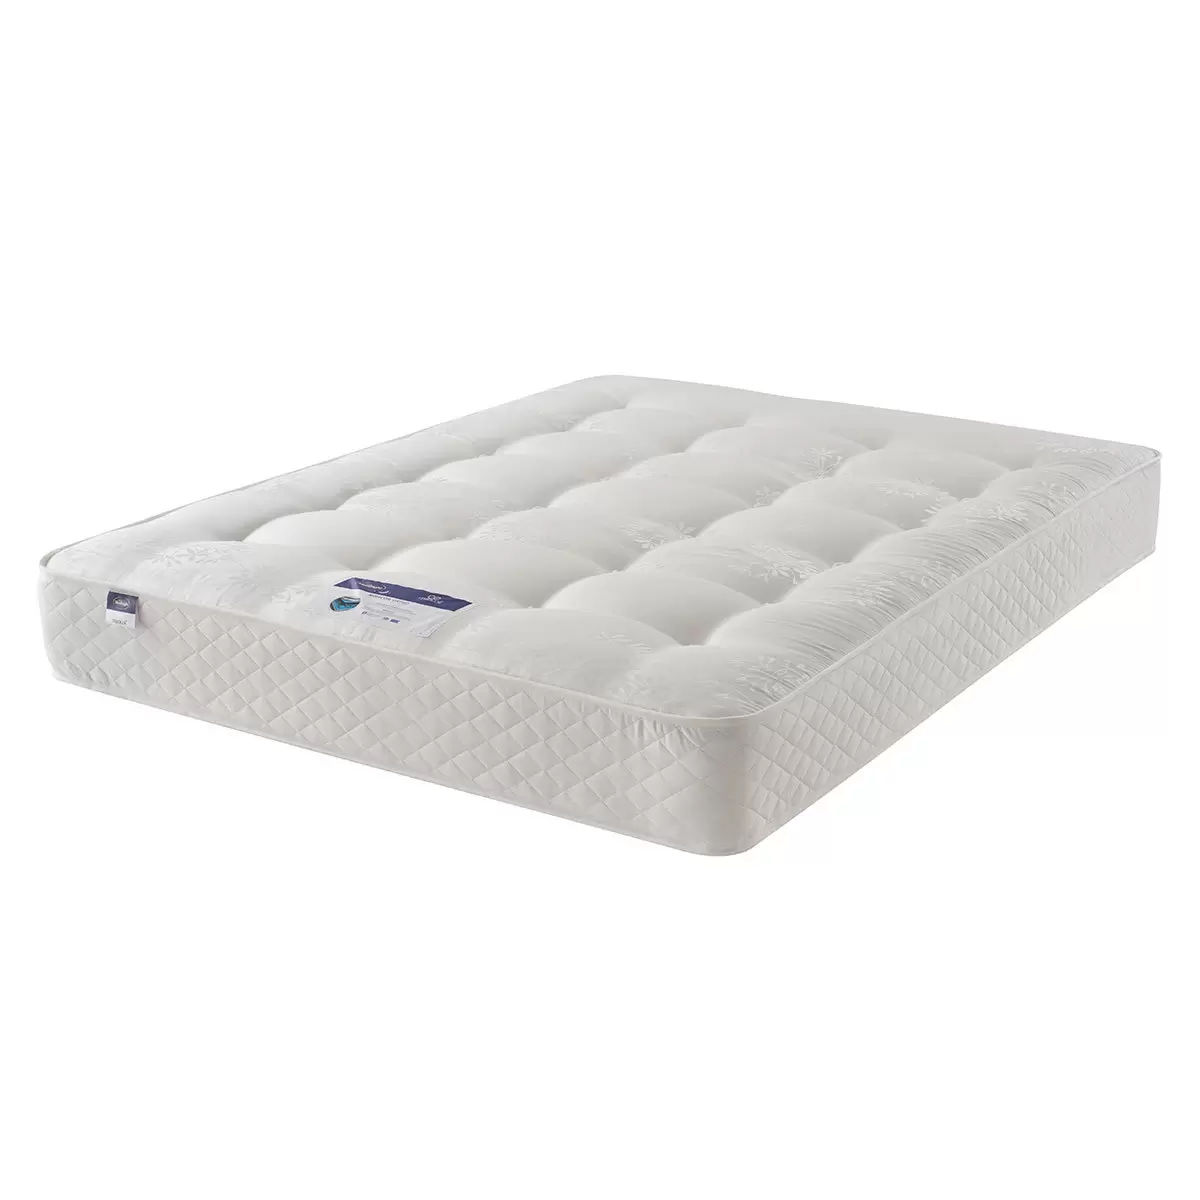 Silentnight Bexley Eco Miracoil Ortho Mattress & Divan in Grey, King Size